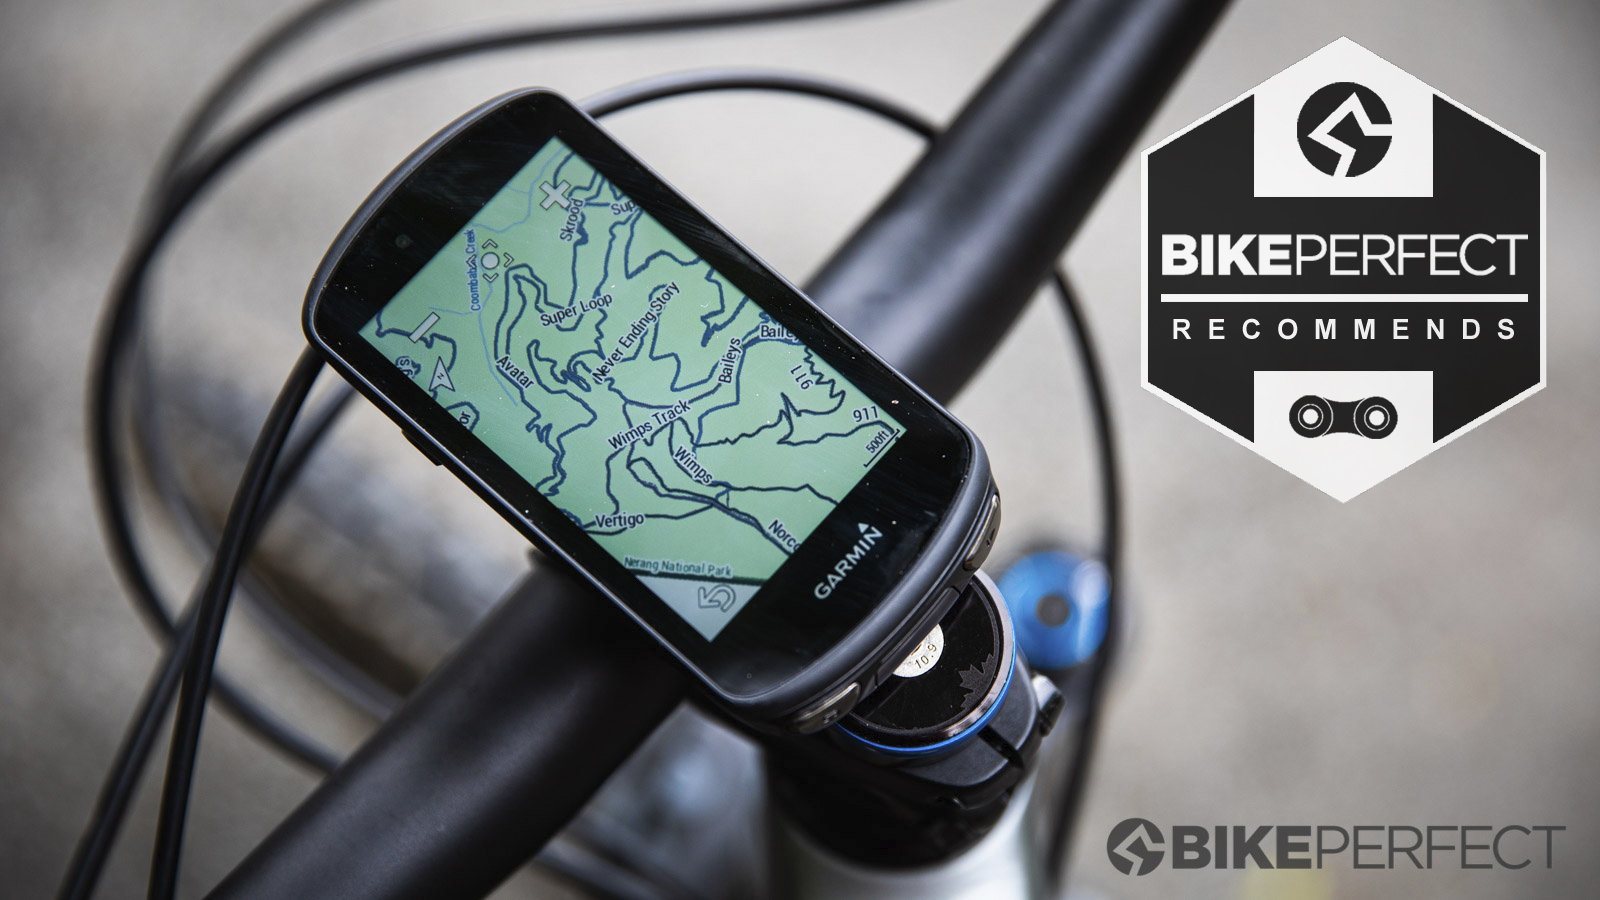 pegs aflange Northern Garmin Edge 1030 Plus review – feature-packed GPS with XL screen |  BikePerfect